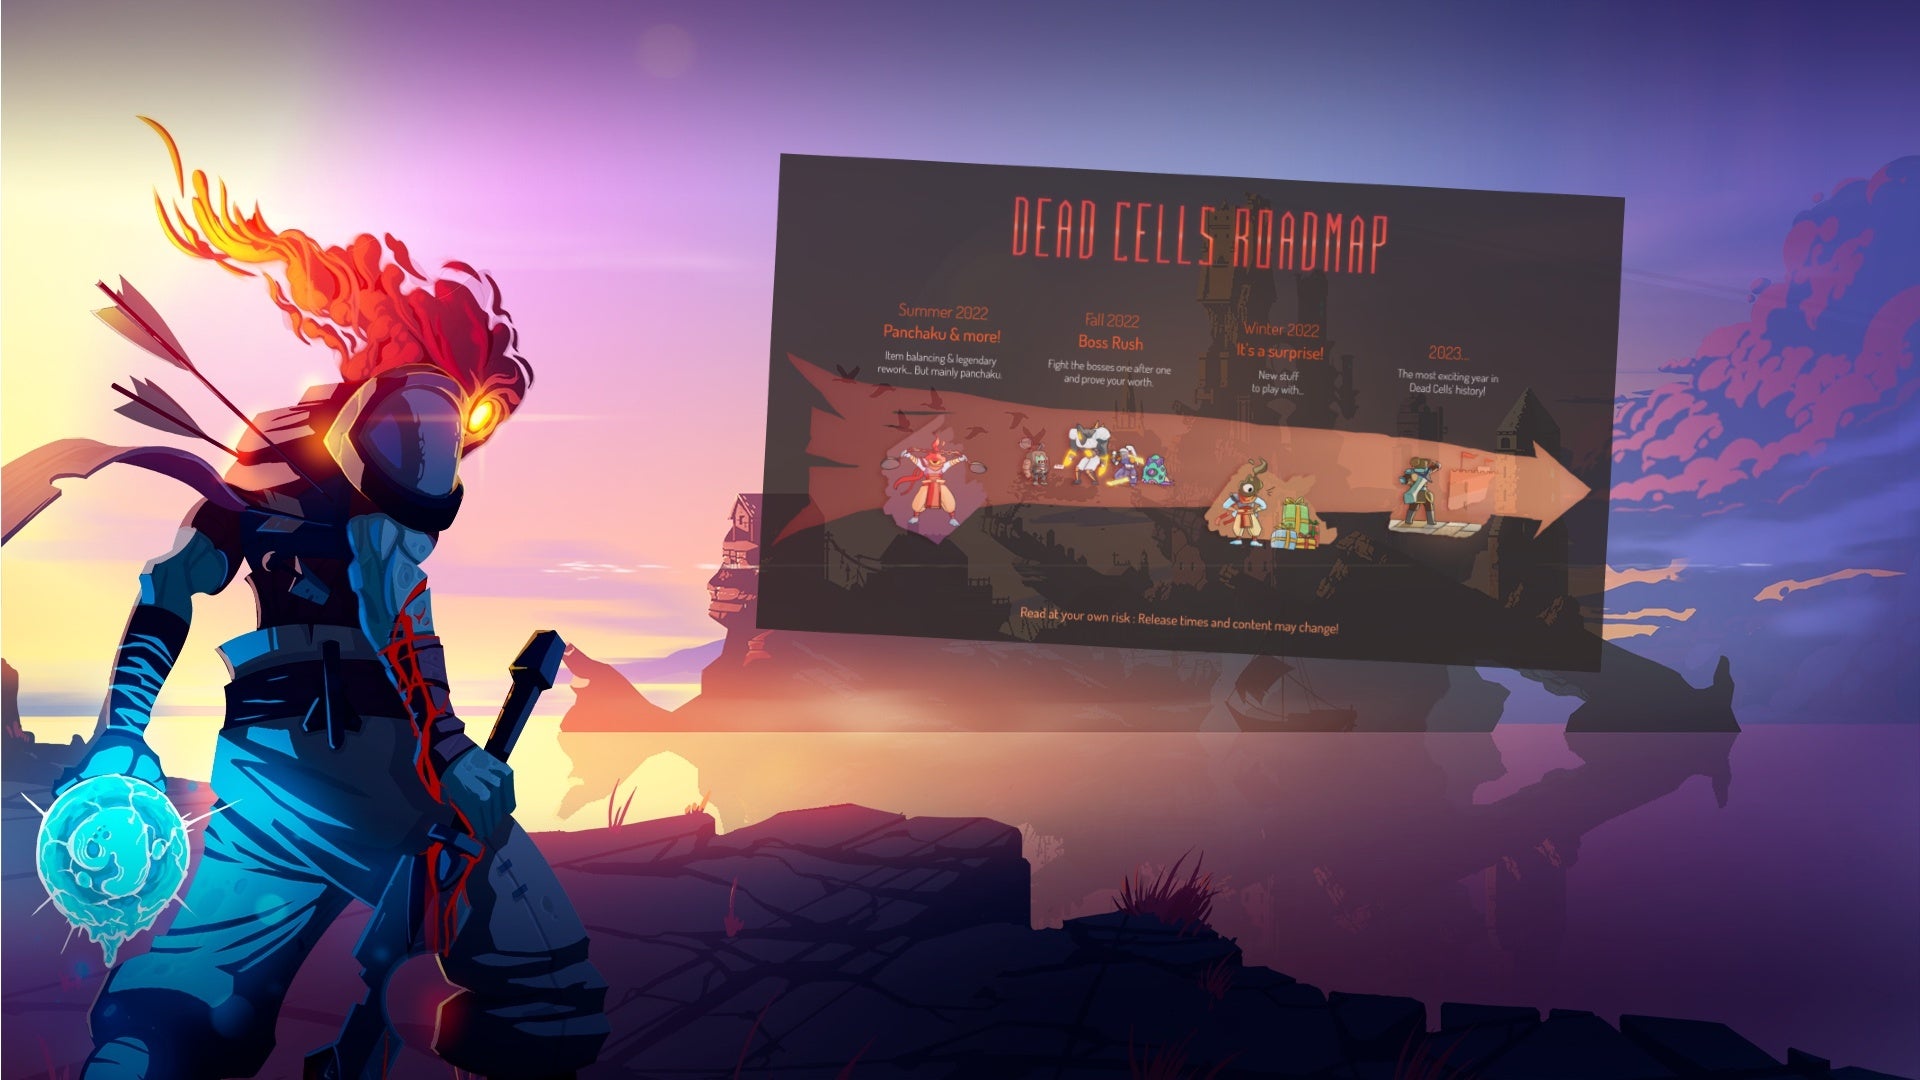 Dead Cells is getting three more updates in 2022, and Motion Twin says 2023 will be the game's most important year to date.